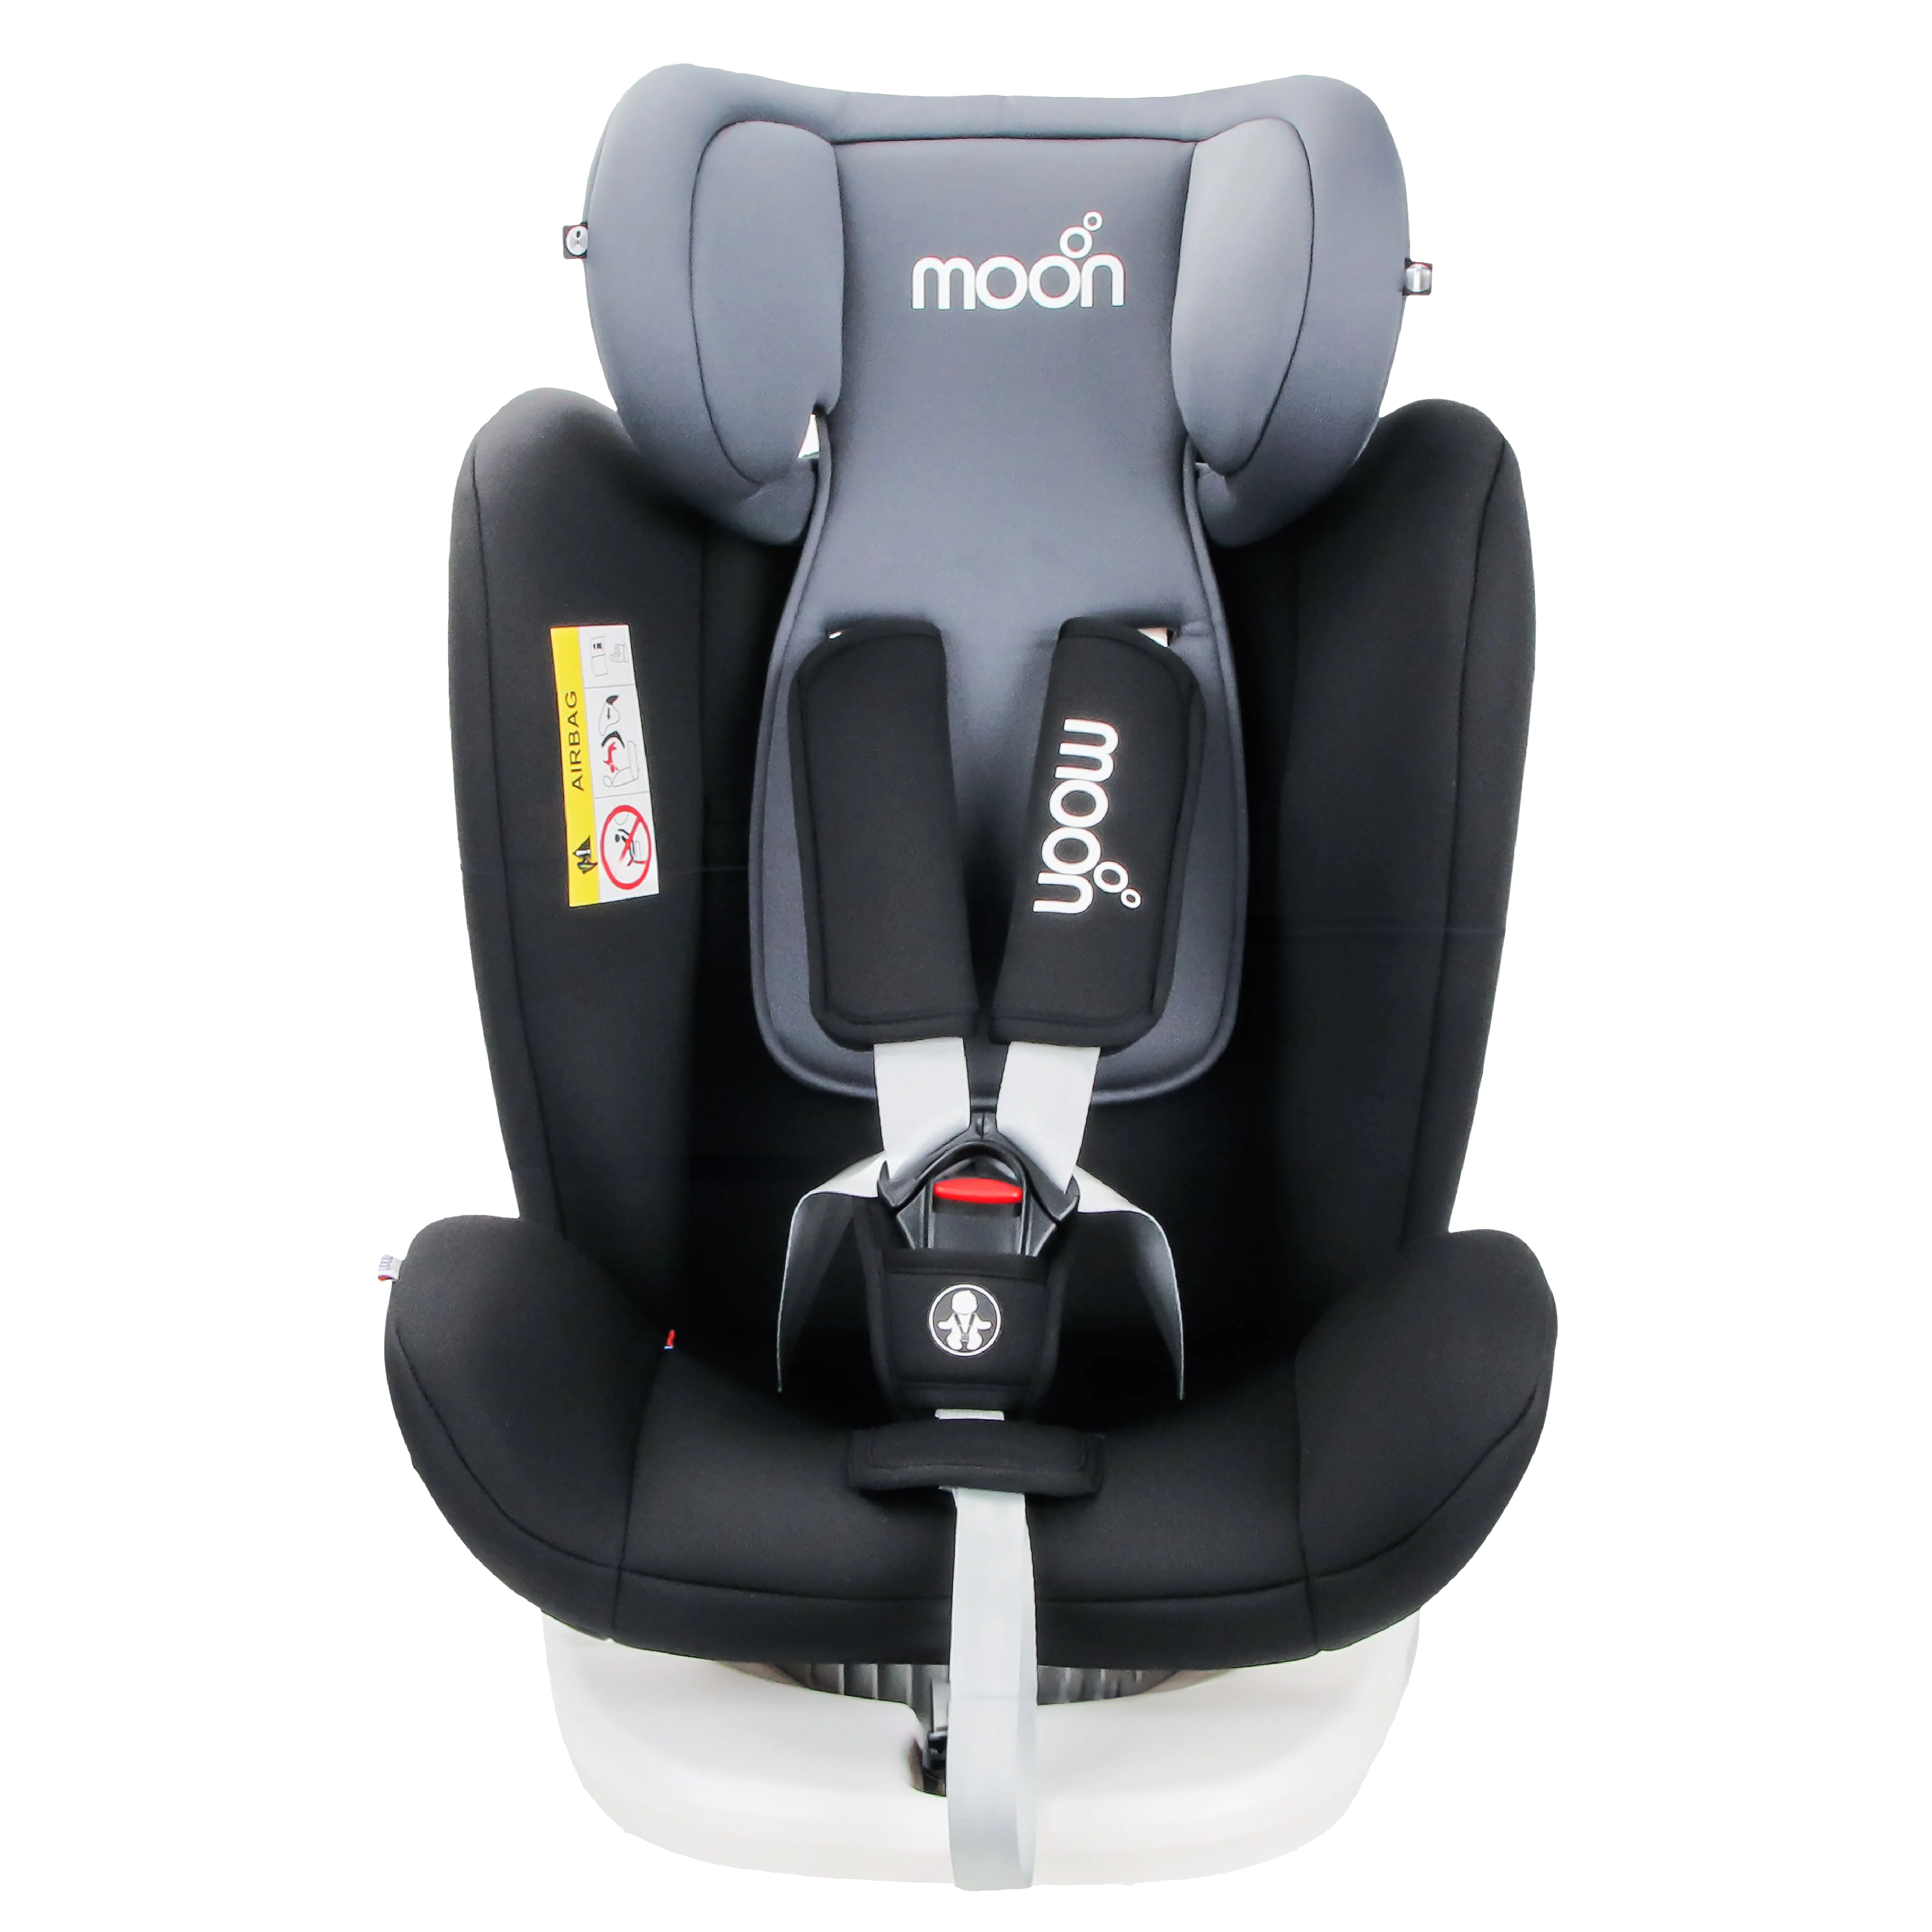 Moon - Gyro Baby Car Seat For Child Group 0+/1/2/3 (0-36 Kg/0-12 Year) Isofix+ Top Tether Rotation 360° - Black